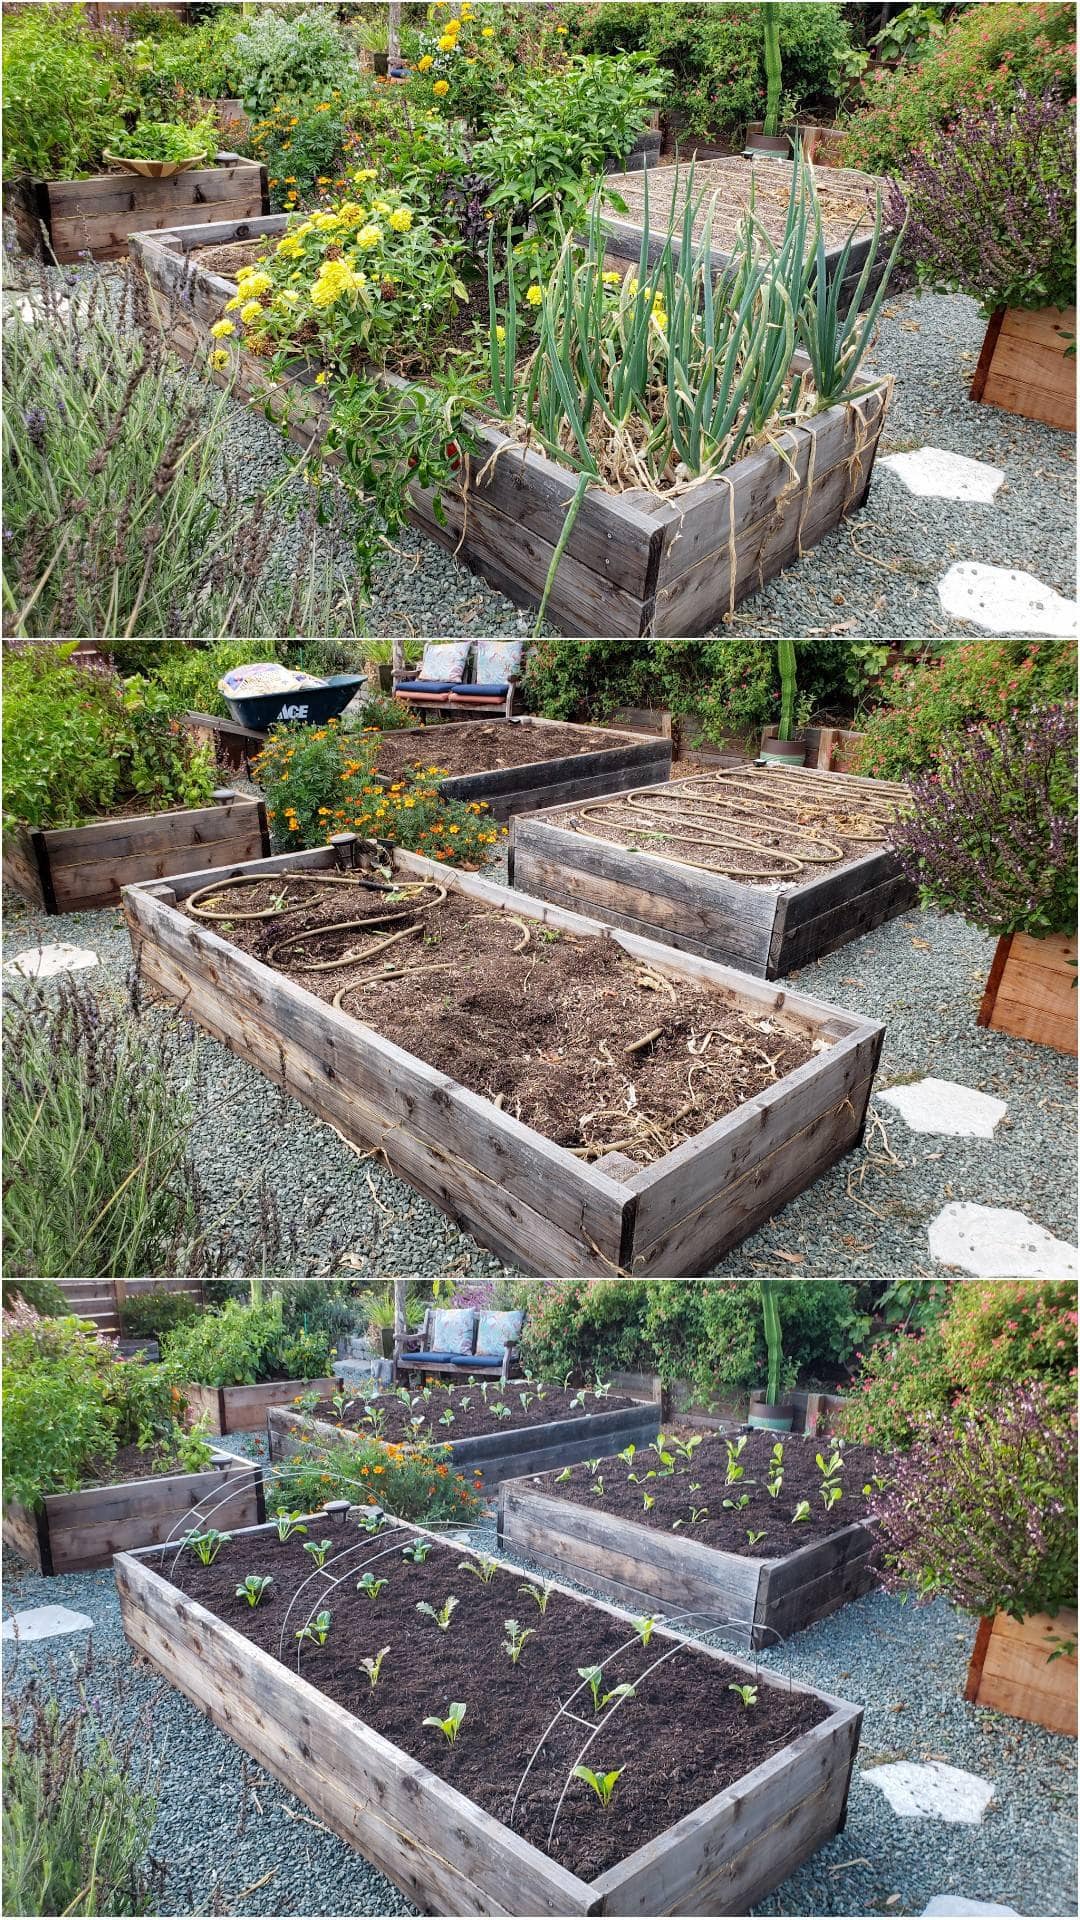 A three part image collage, the first image shows a number of garden beds, most of them are full of mature plants that are still producing fruit. There are various pollinator plants planted throughout the area as well. The second image shows the same garden beds, however, all of them are now empty except one. There are soaker hoses sitting in two of the three beds and some of the soil looks disturbed from removing the plants. The third image shows the same garden beds after being re-amended with fertilizer and fresh compost. The garden beds have also been planted out with tender young seedlings, spaced in neat rows, all standing up perky, pointing towards the sun. 